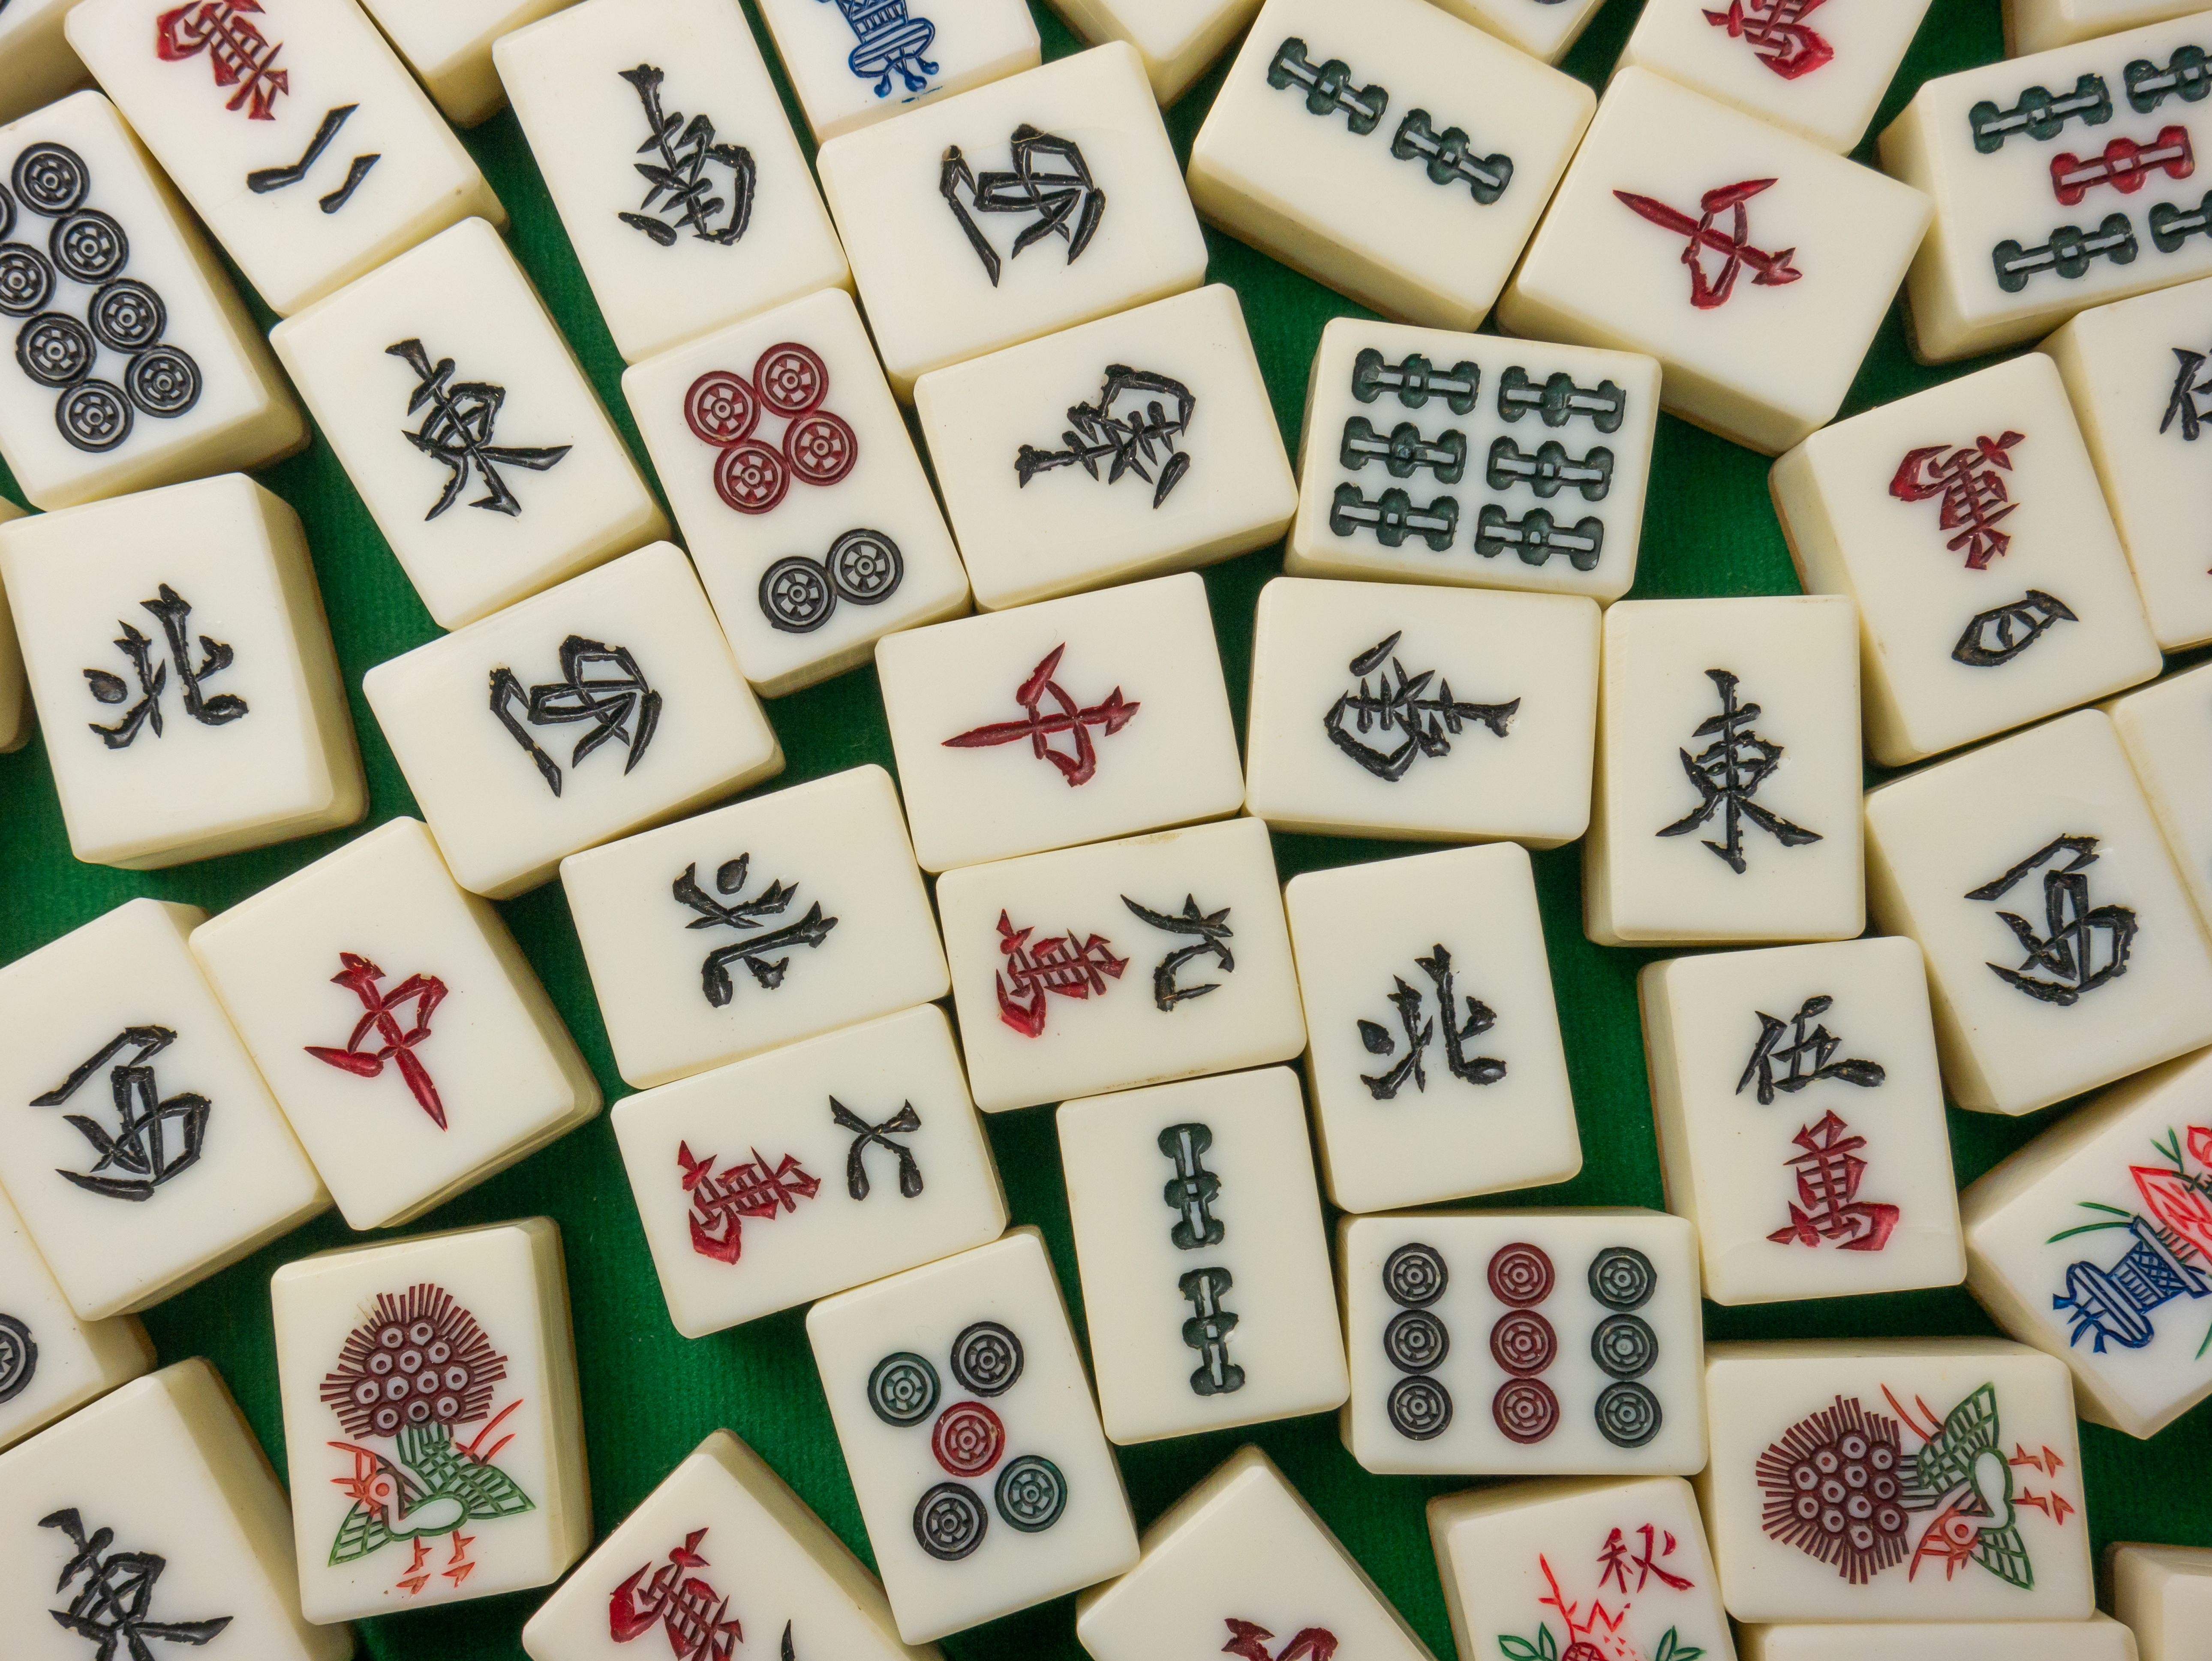 Several mahjong tiles on a green background